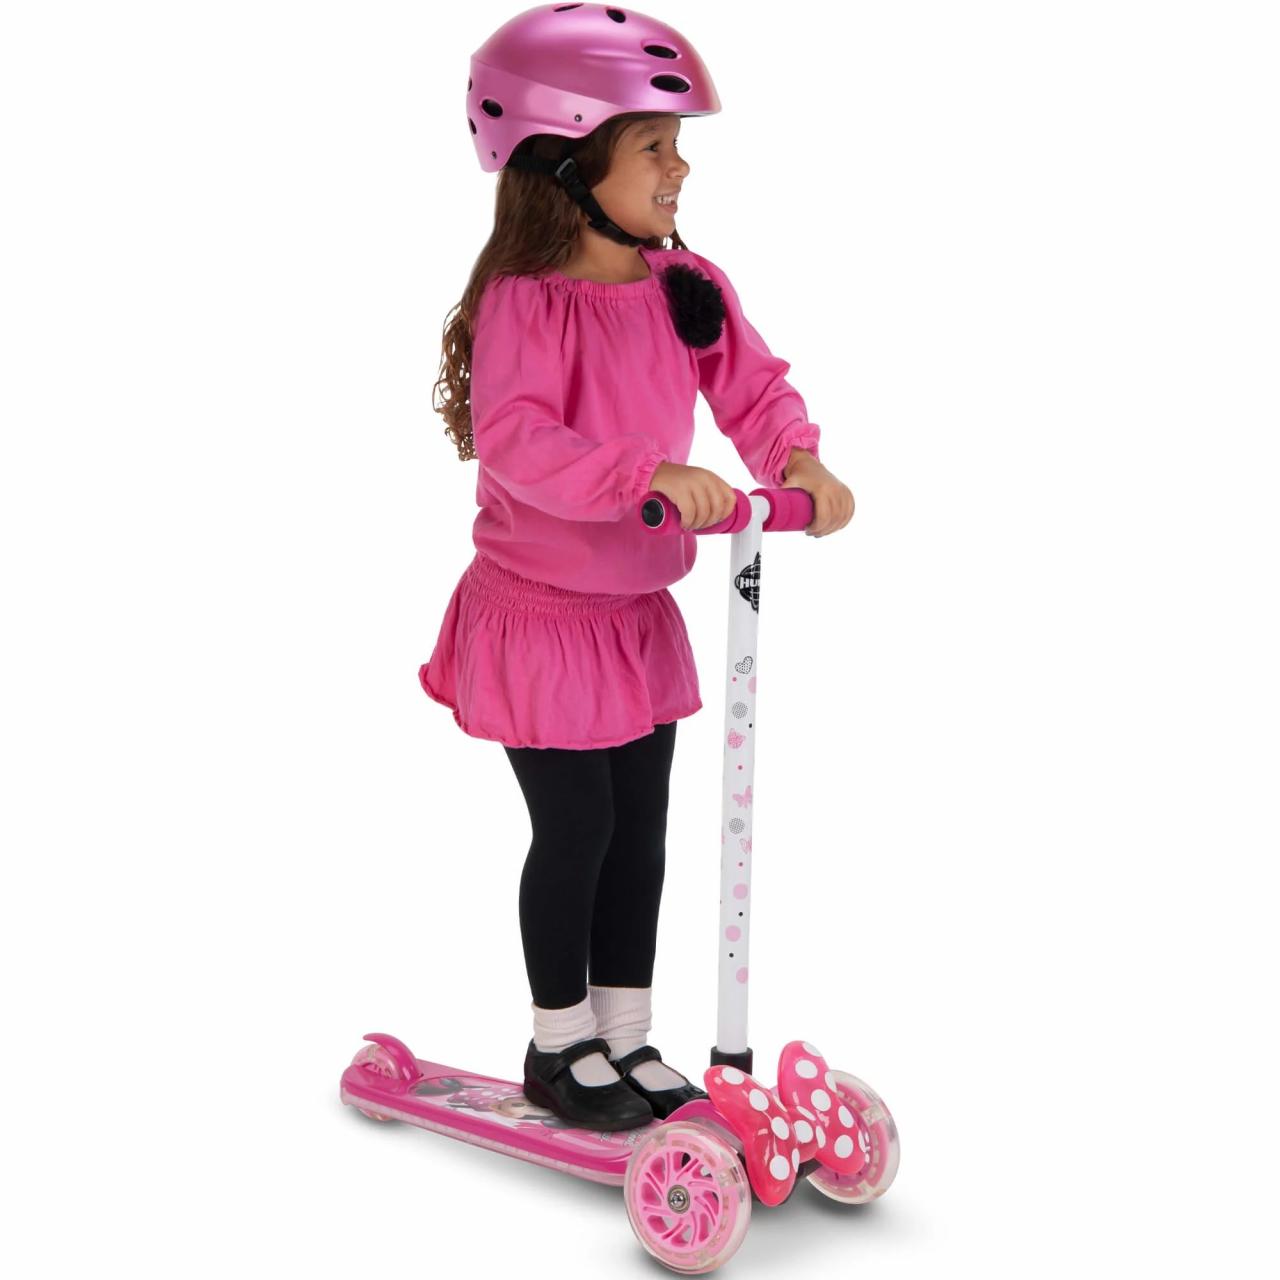 Disney Minnie Mouse 3Wheel Scooter for Toddlers by Huffy